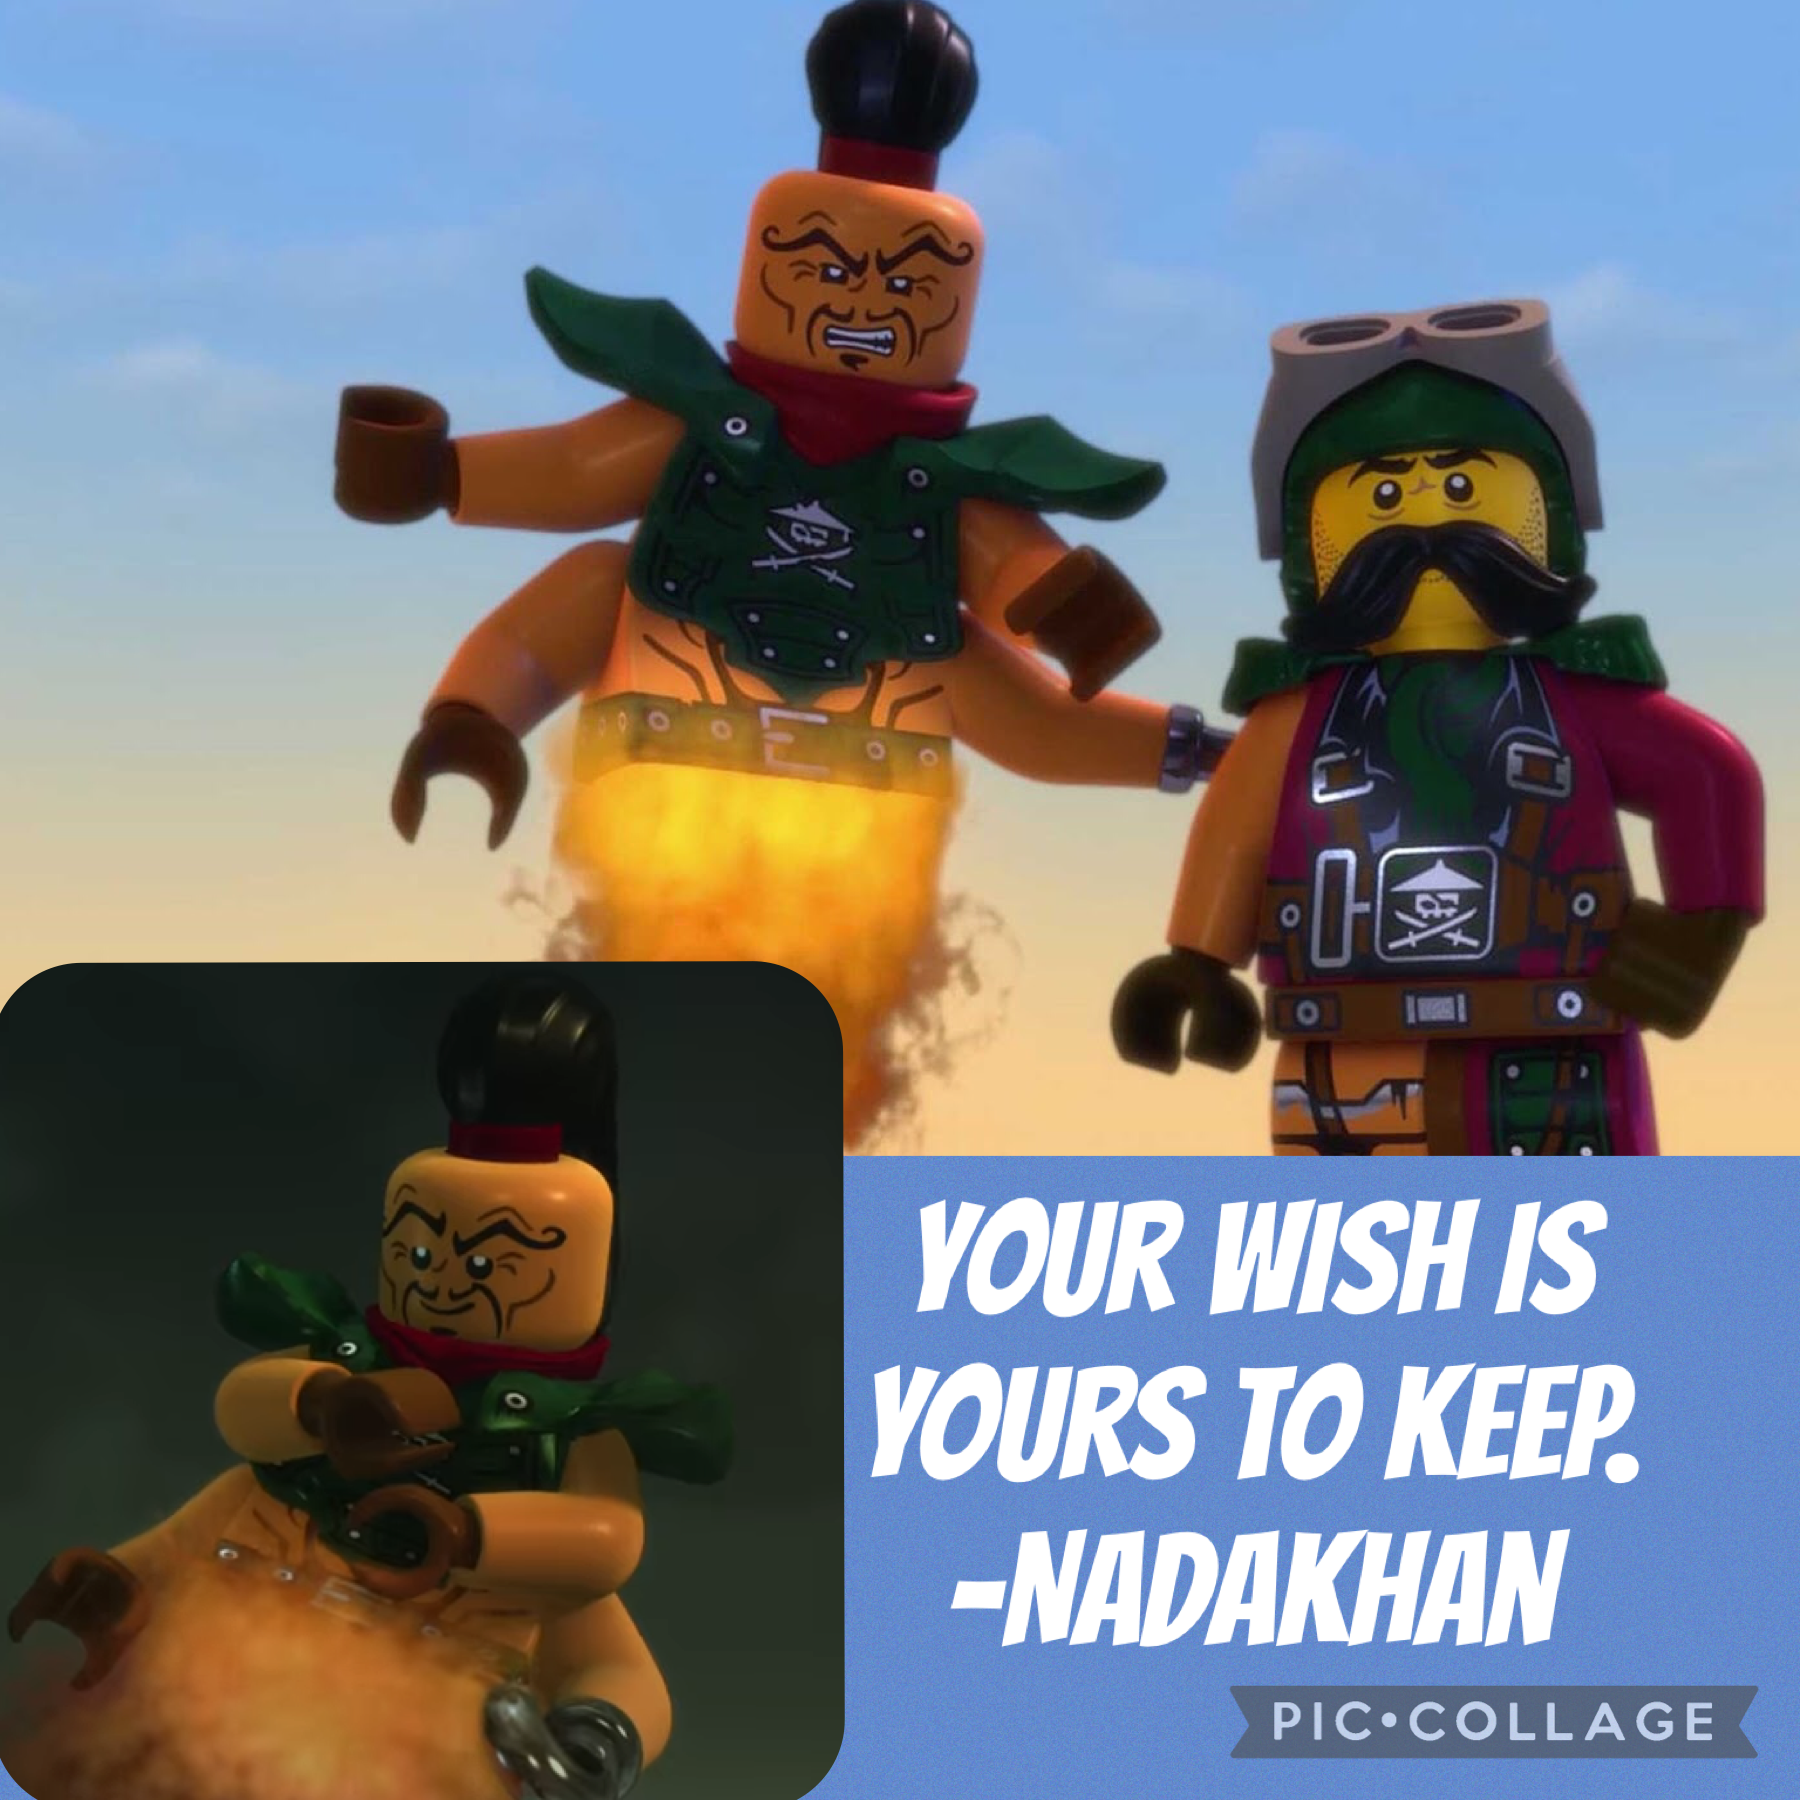 “Your wish is yours to keep” -Nadakhan

Isn’t he right? Don’t wish it all away. 